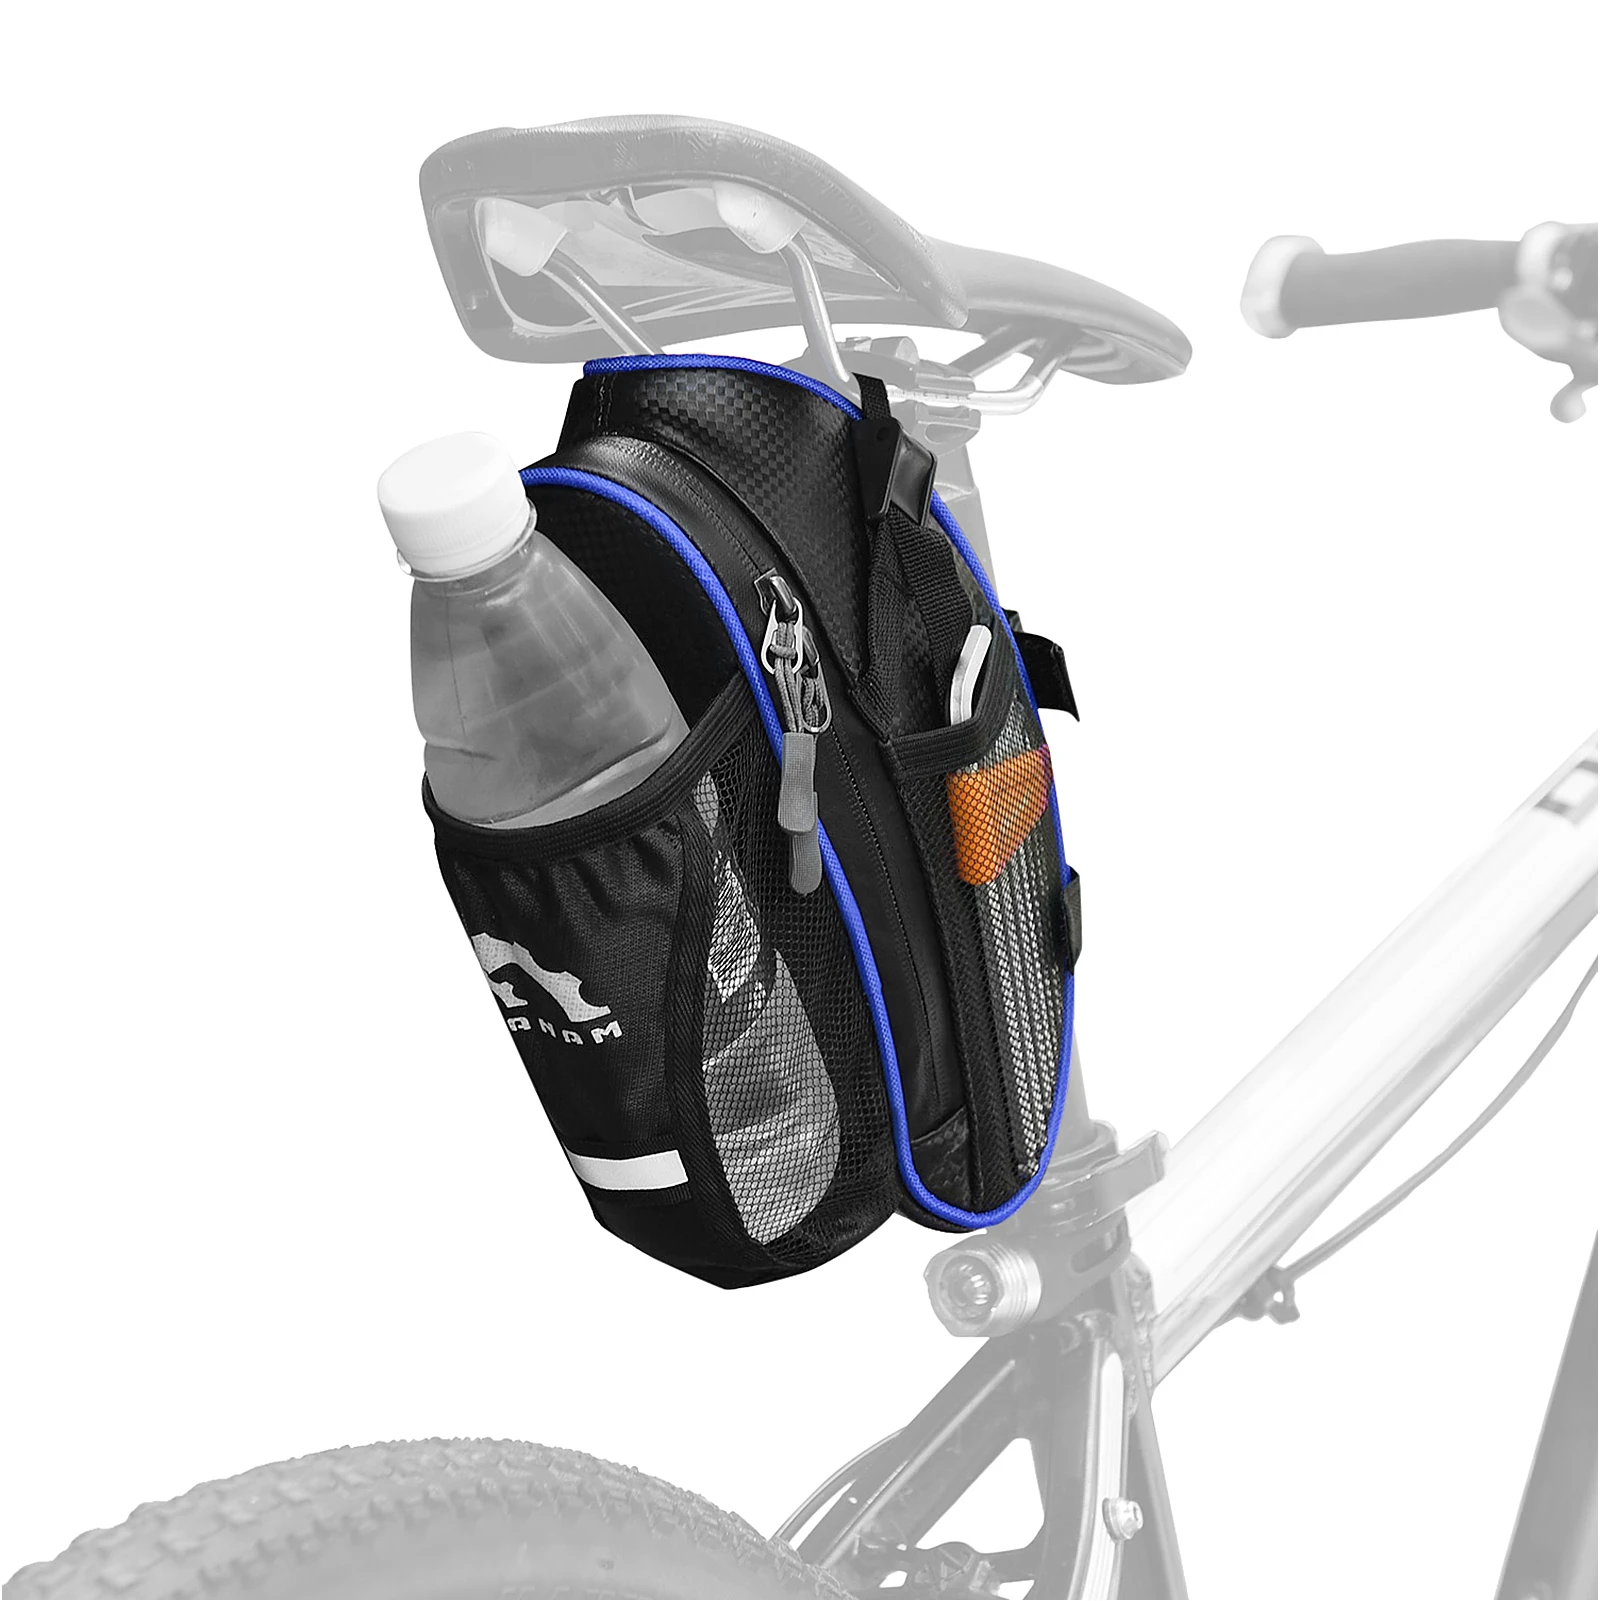 YSANAM Bike Bag Reflective Bike Saddle Bag with Water Bottle Pouch MTB Bicycle Bag Panniers Bicycle Accessories